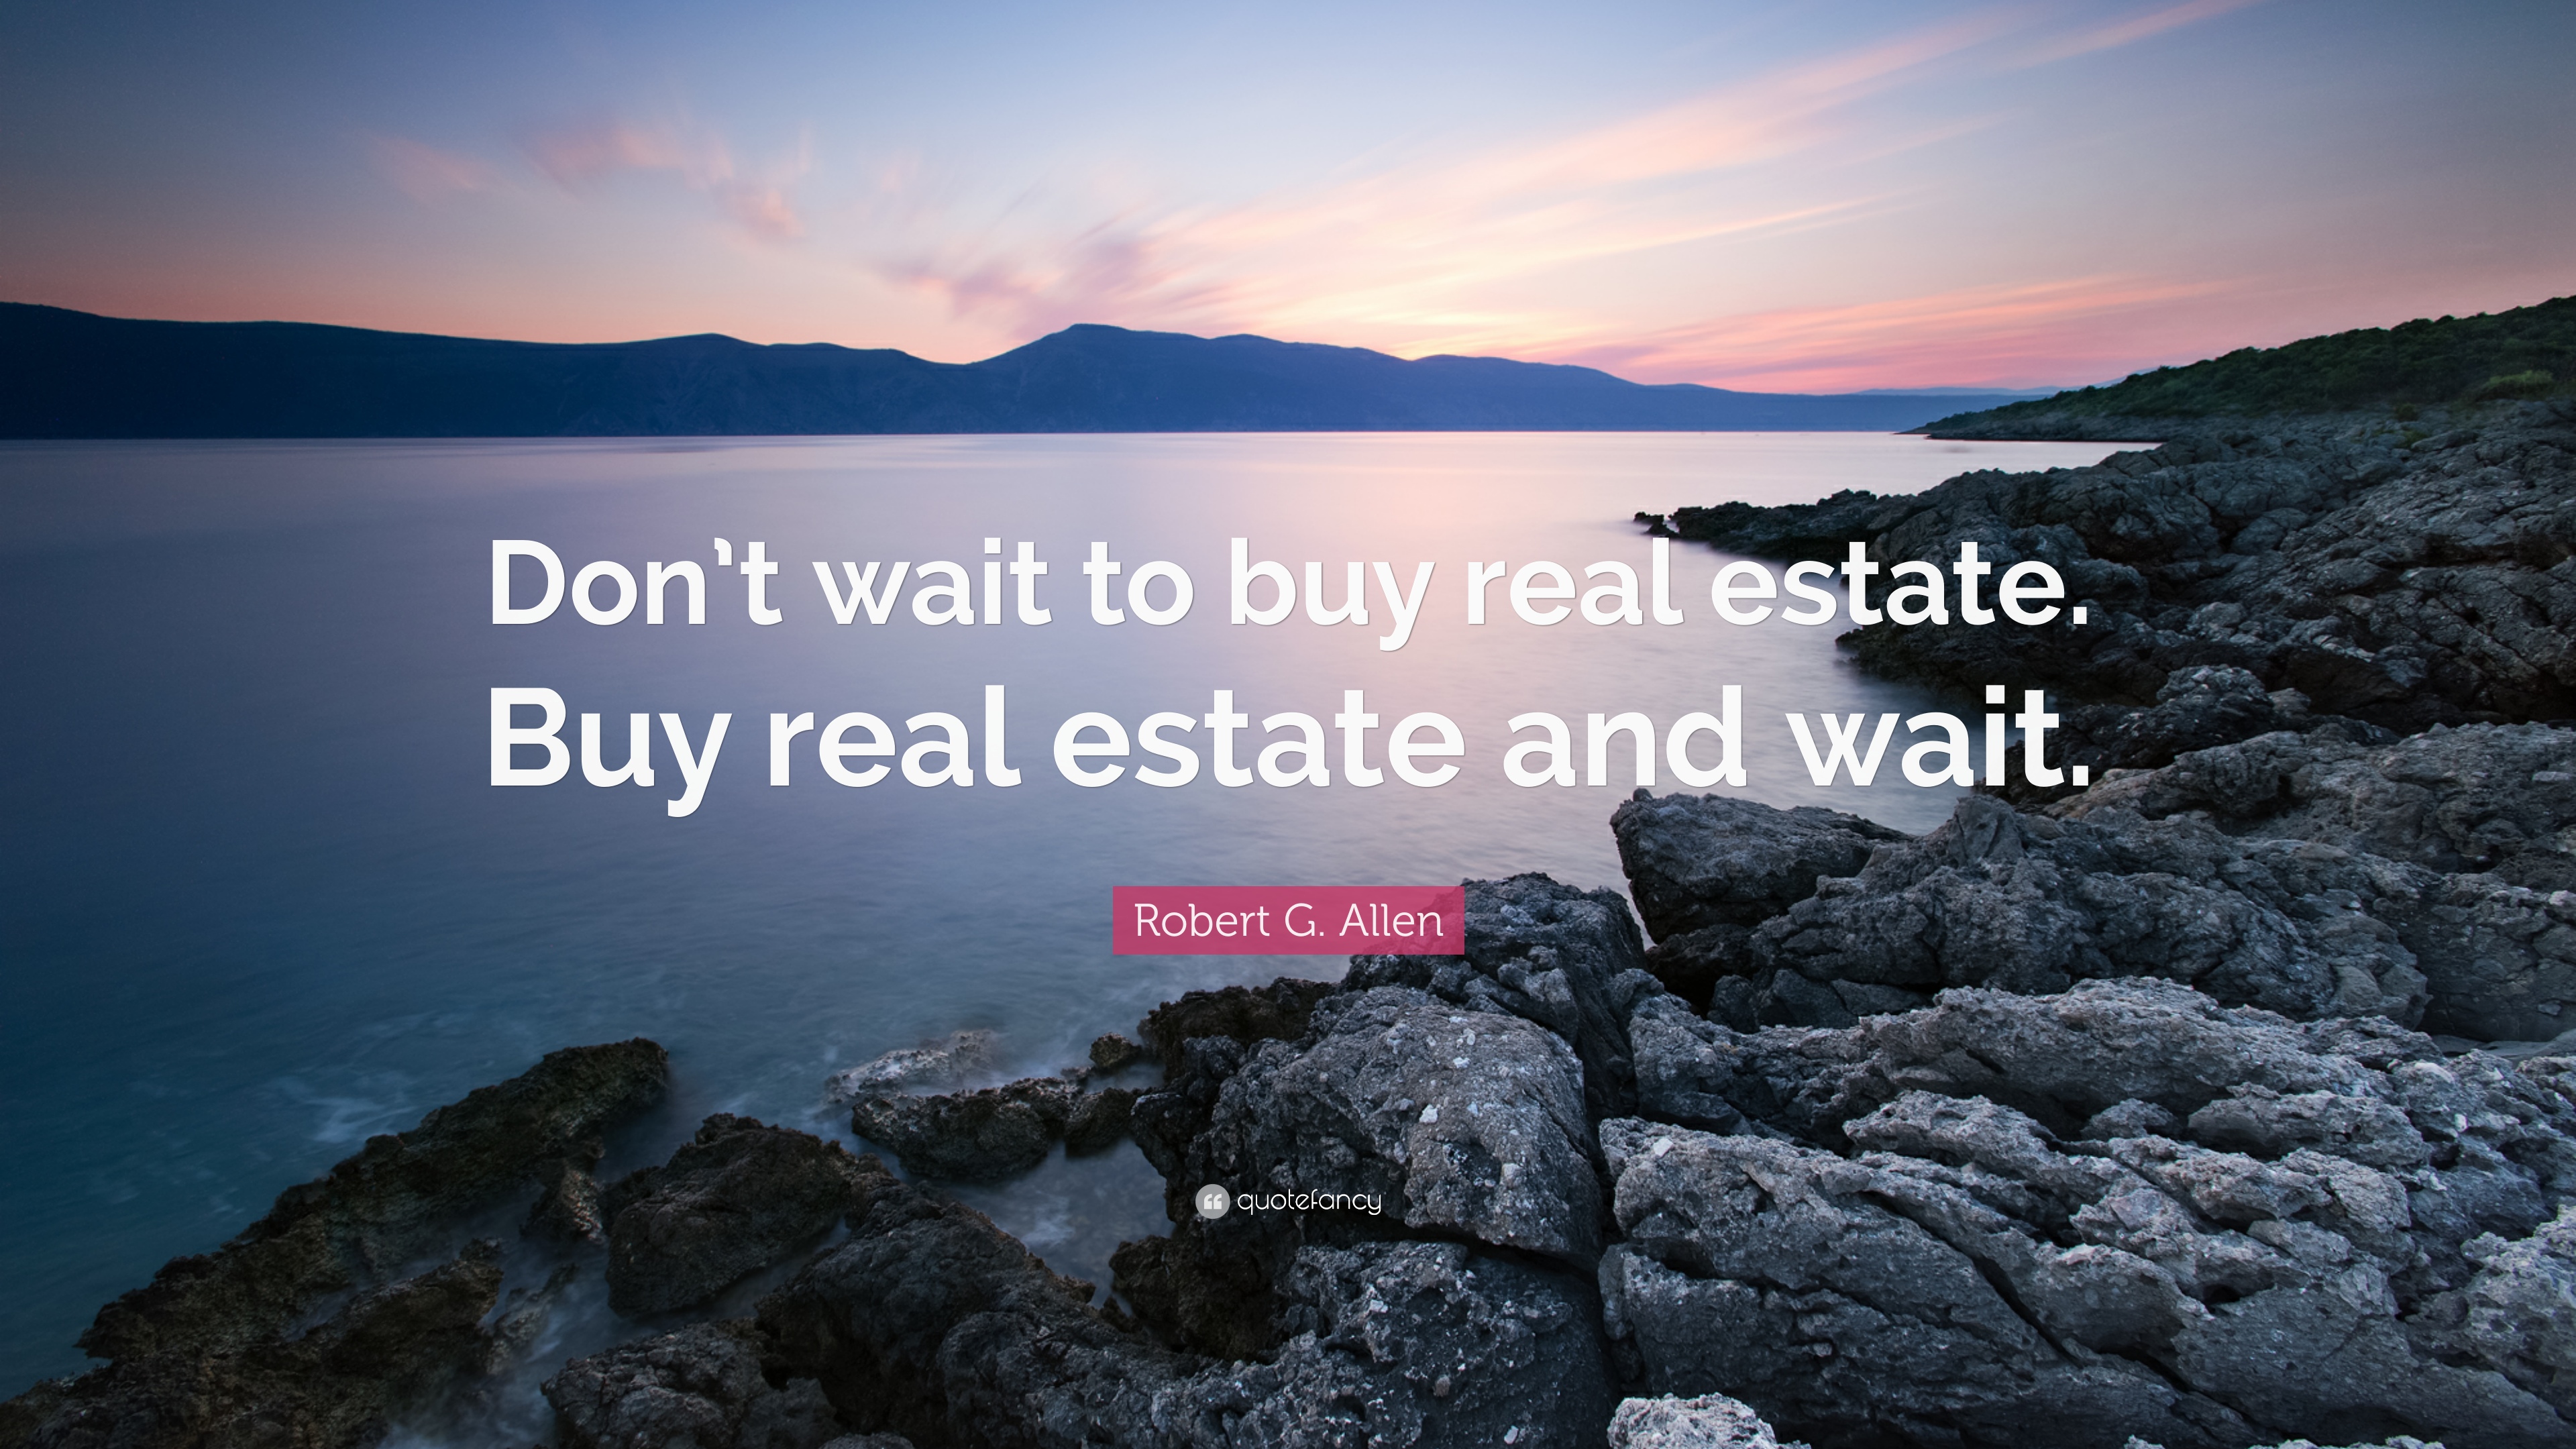 Robert G. Allen Quote: “Don't wait to buy real estate. Buy real